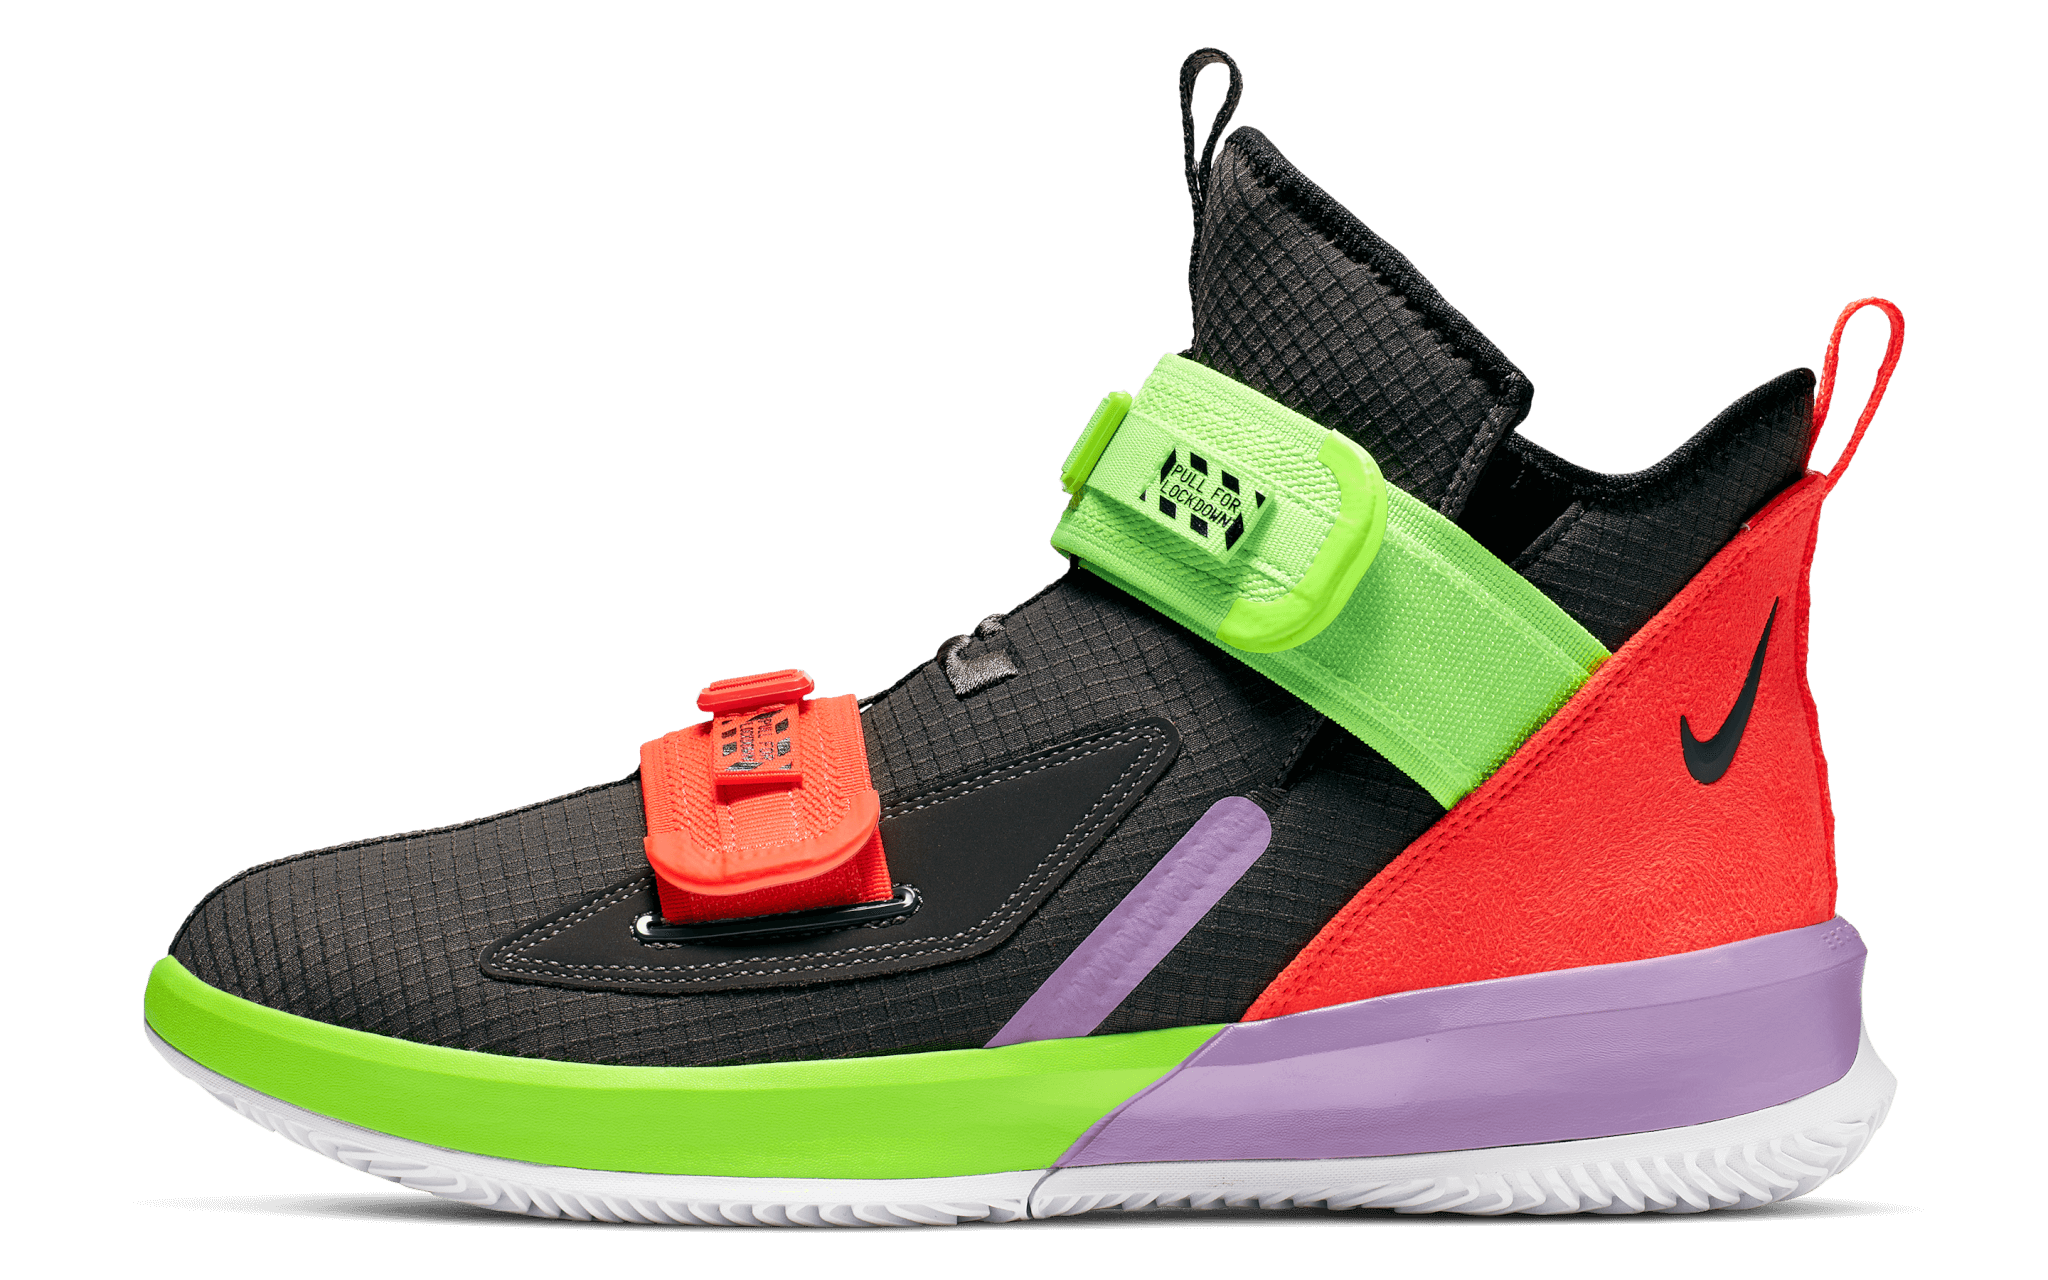 Nike Lebron Soldier 13 Performance Review | 3 Sneaker Expert Opinions